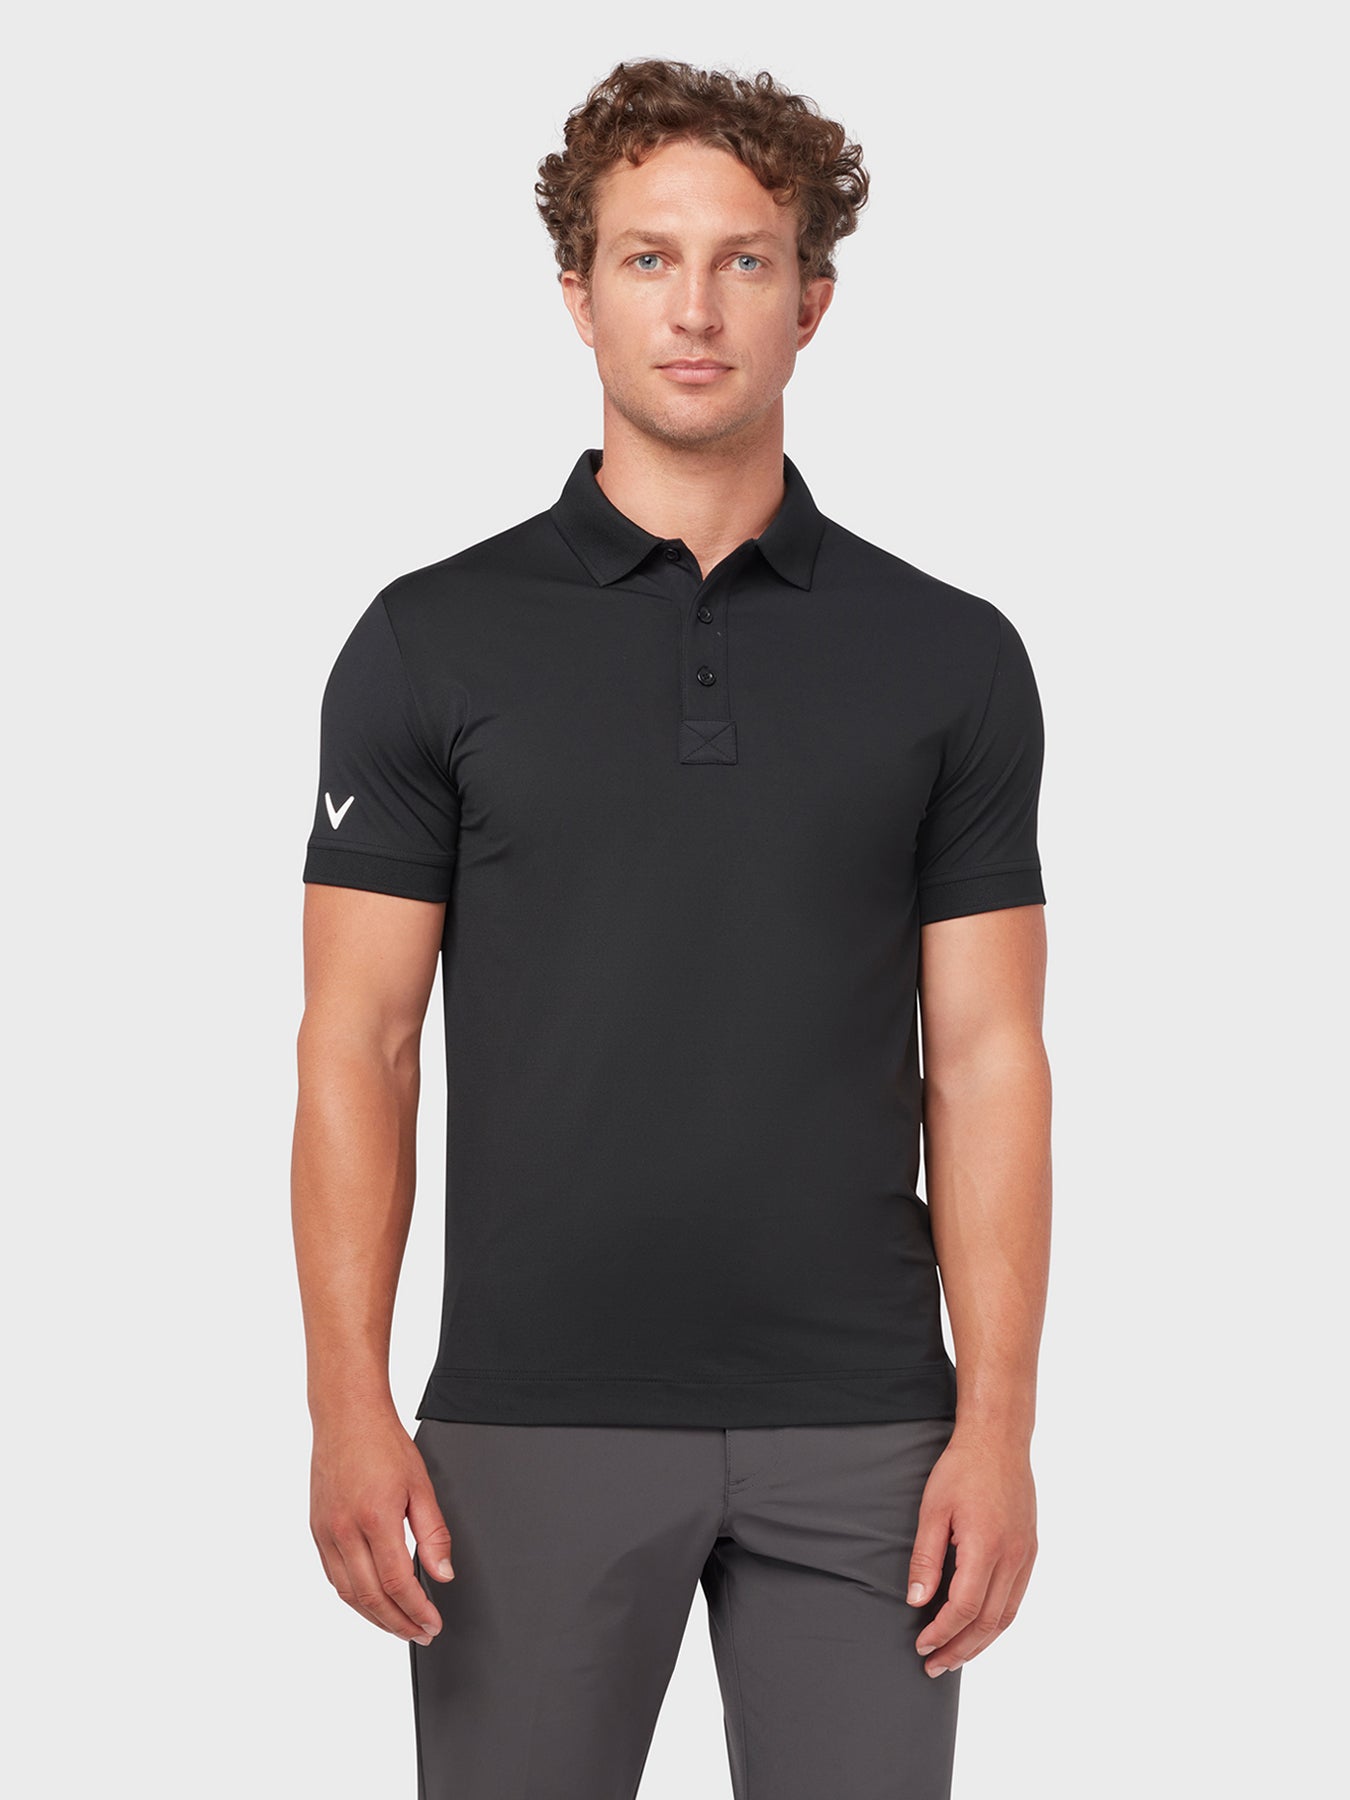 View X Series Solid Ribbed Polo In Caviar Caviar XXL information